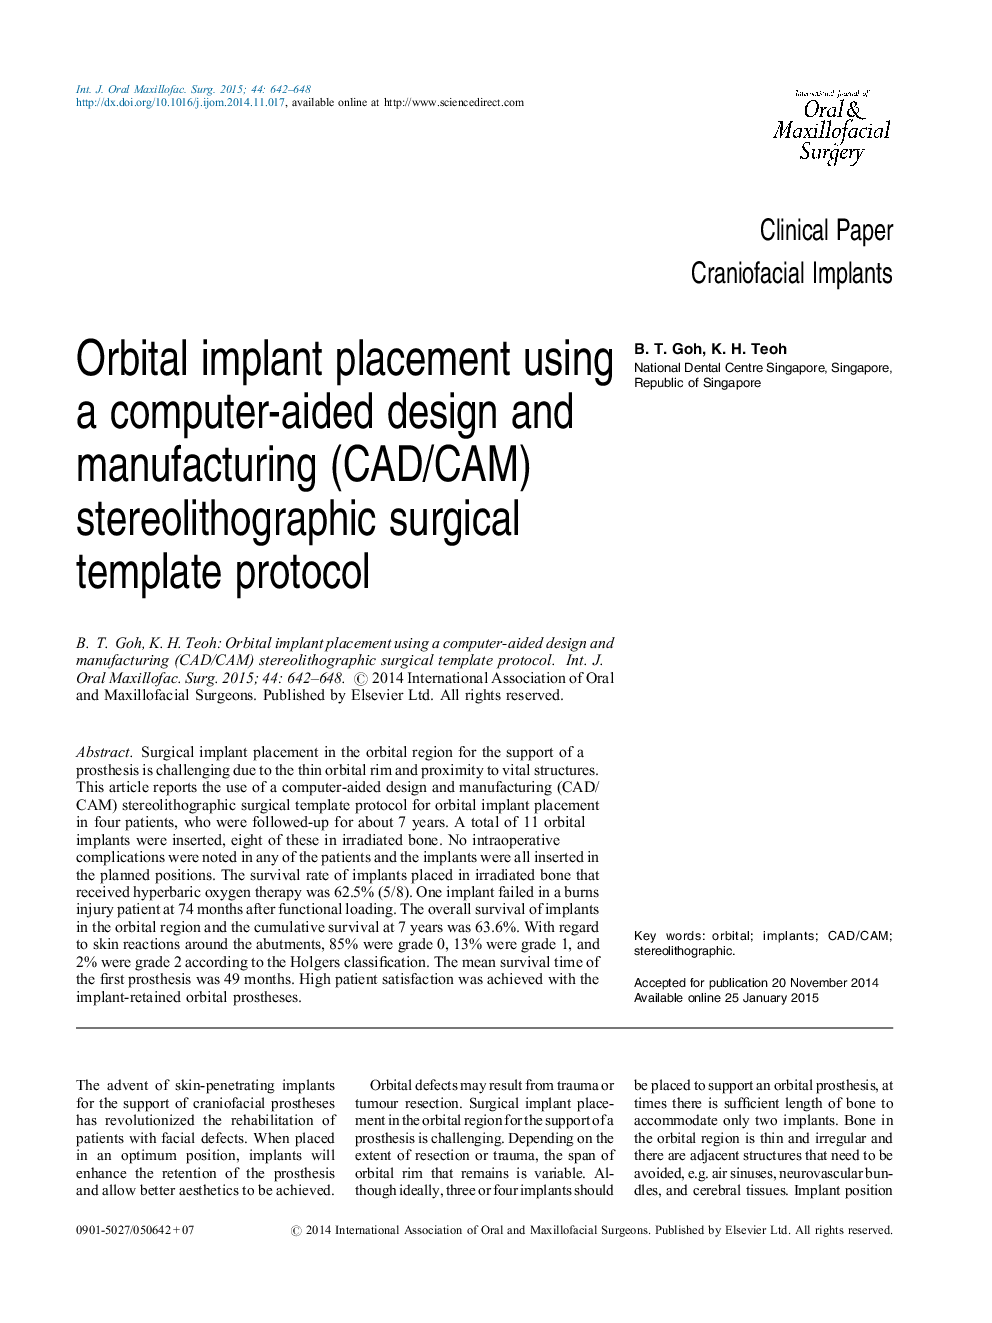 Orbital implant placement using a computer-aided design and manufacturing (CAD/CAM) stereolithographic surgical template protocol